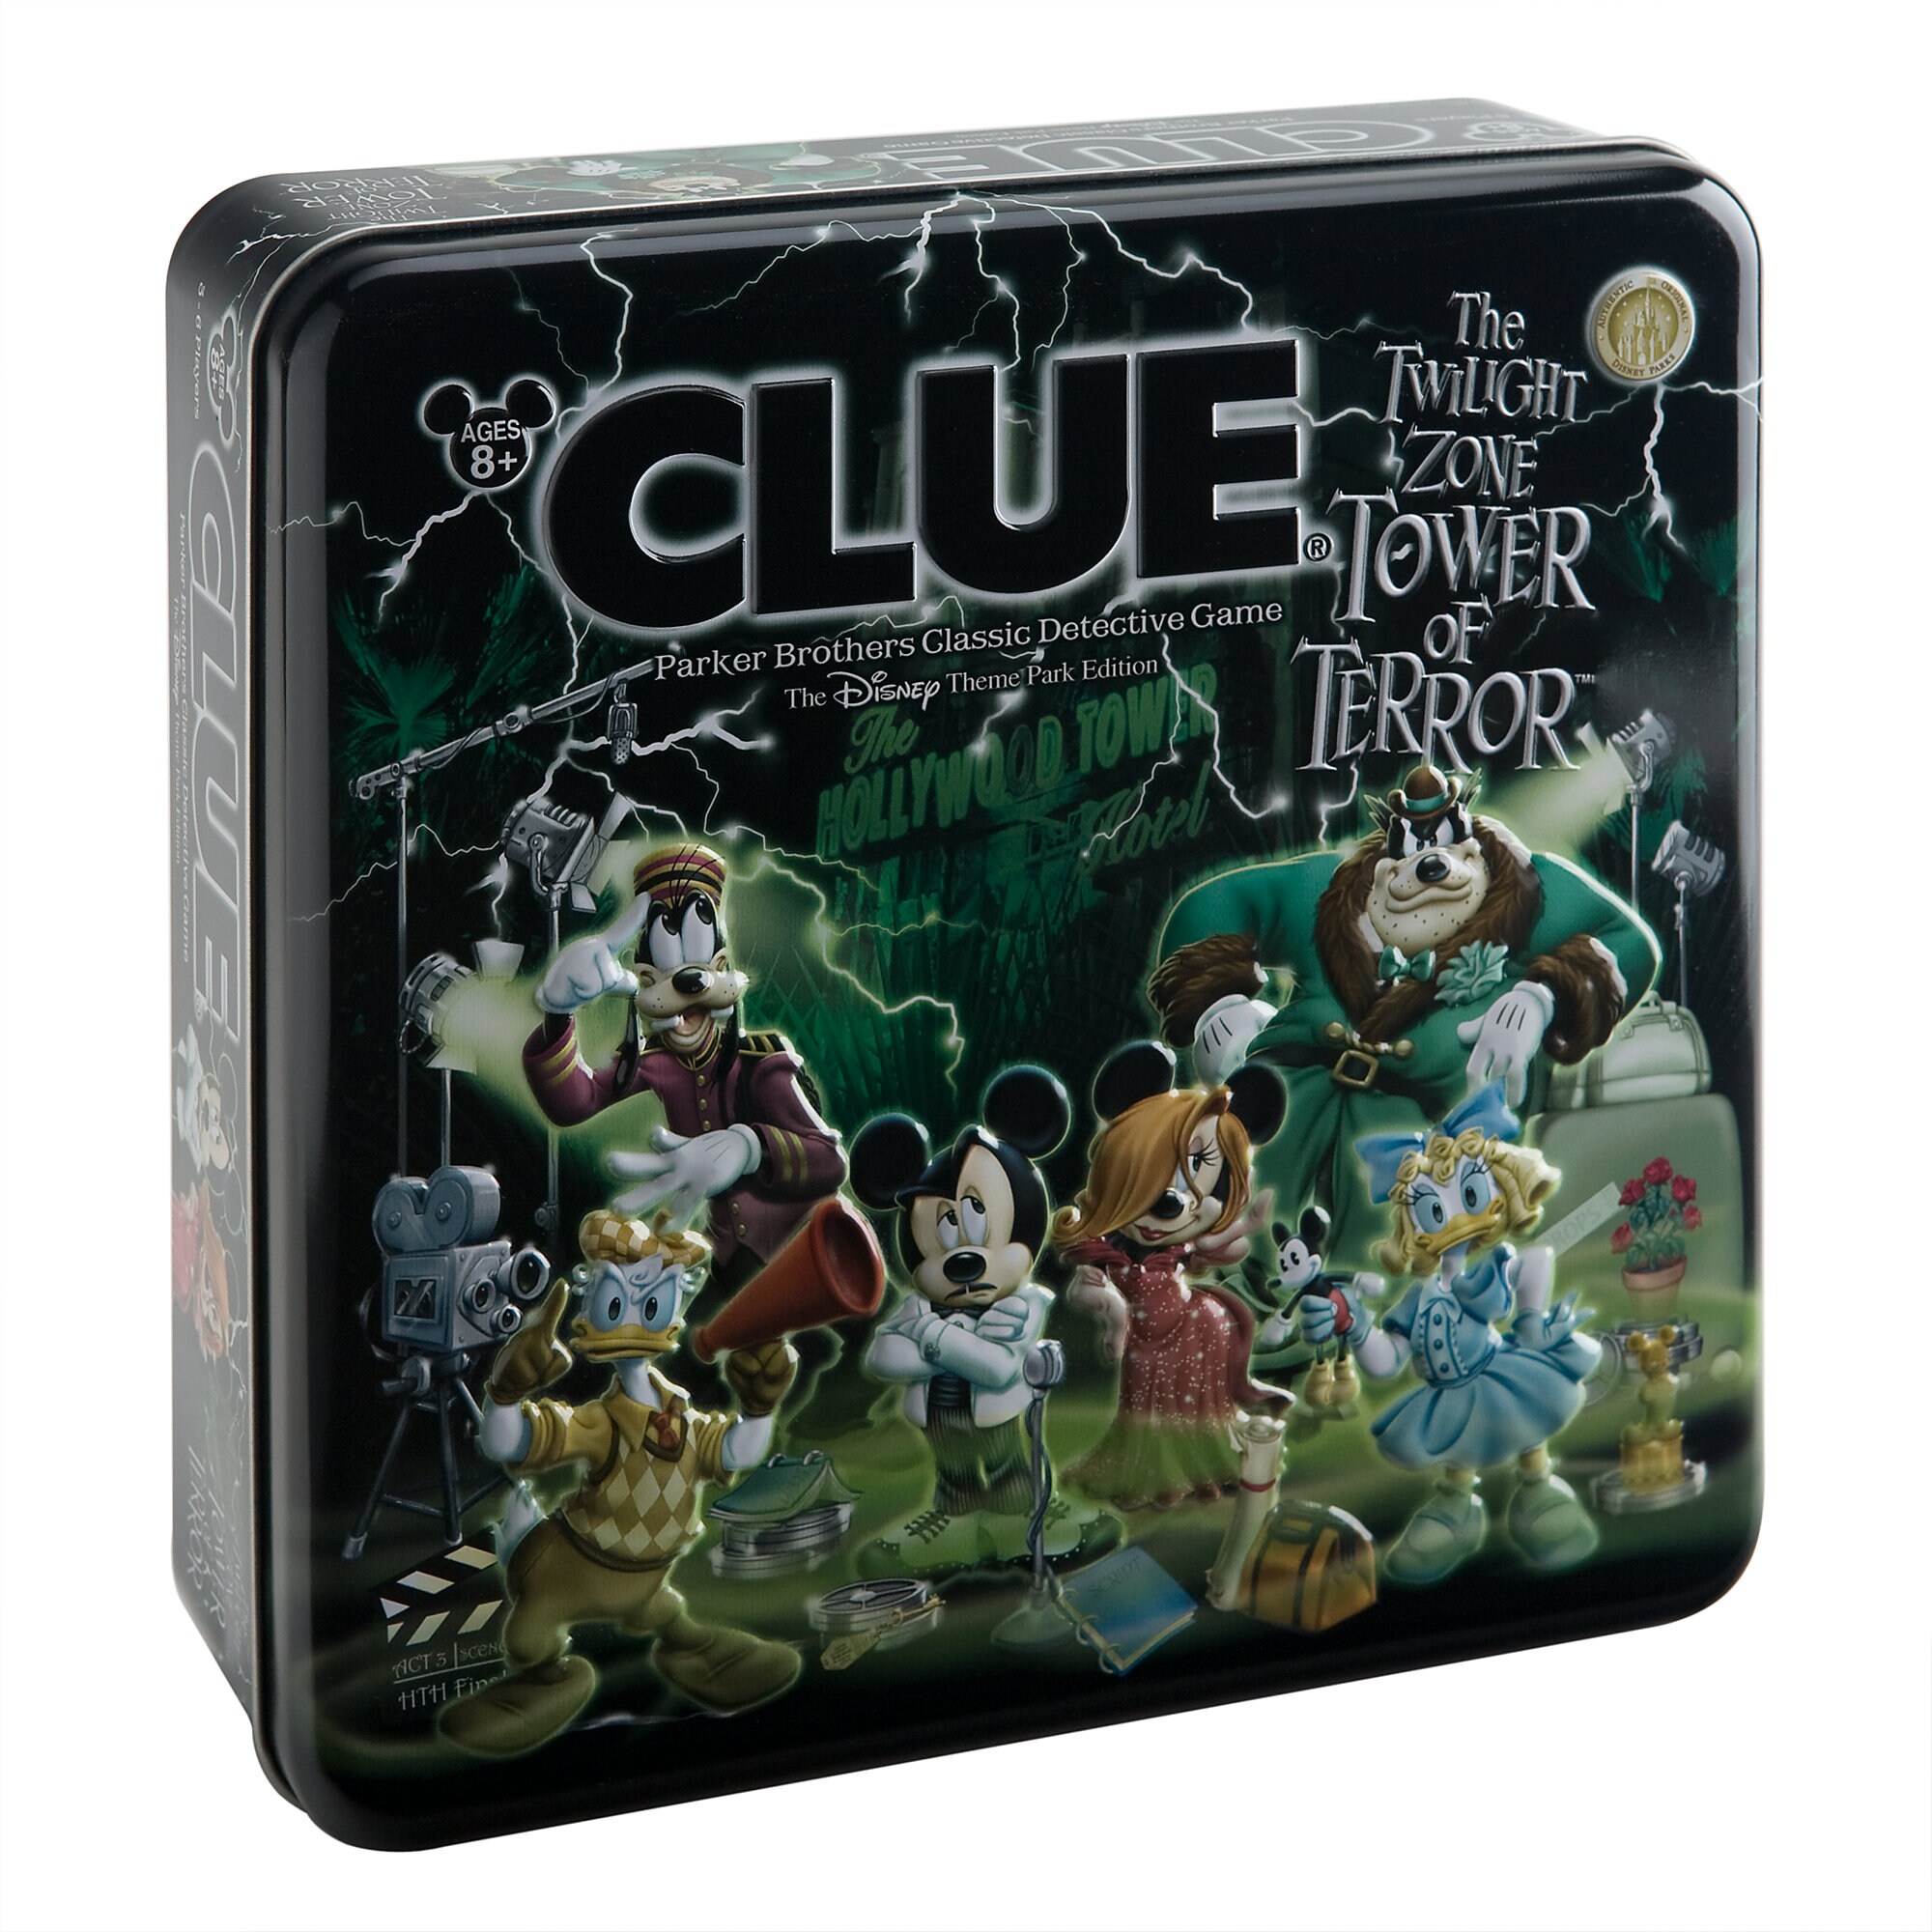 Clue® The Twilight Zone Tower of Terror™ Disney Theme Park Edition Game